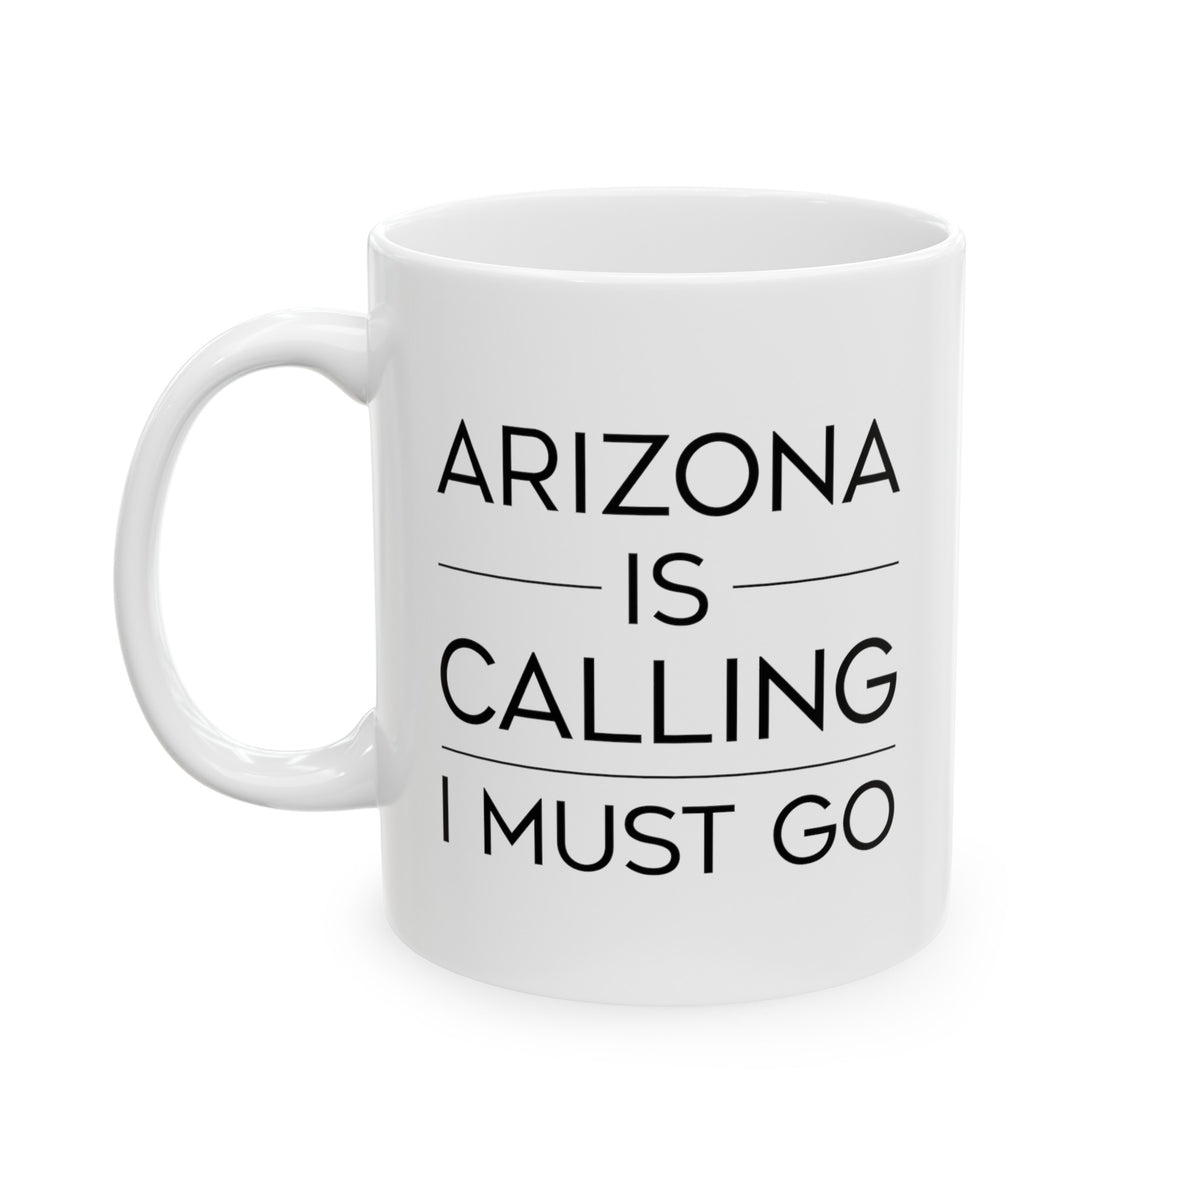 Arizona Coffee Mug - I must go - State Unique Funny Gifts For Men and Women